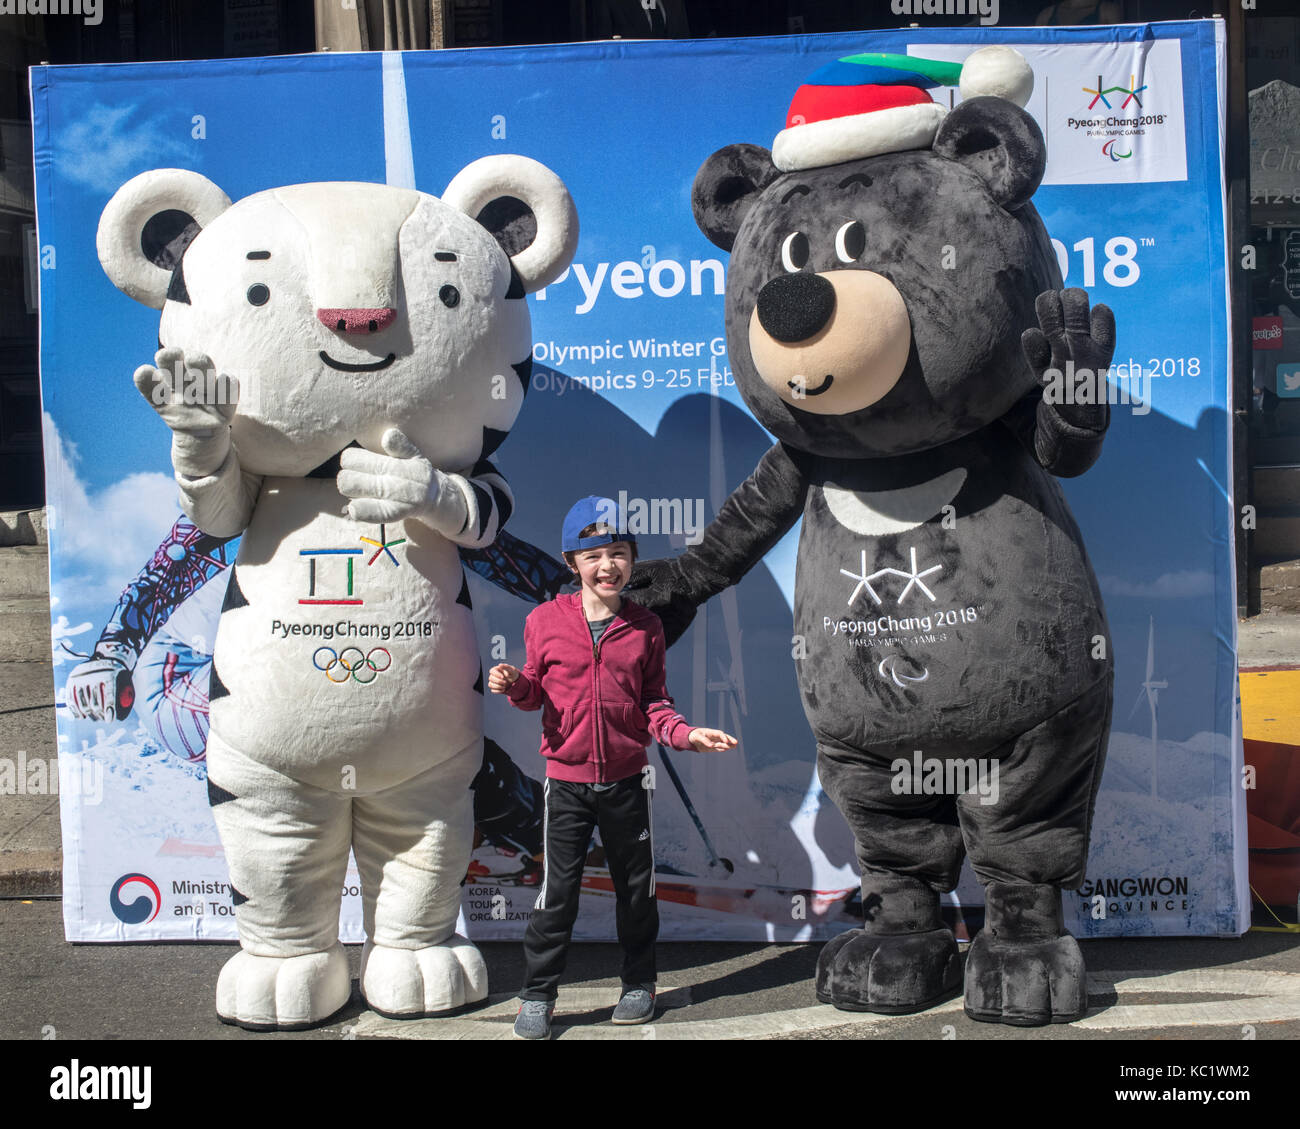 New York, USA, 1 October 2017. A kid poses with Soohorang (L) and Bandabi, the official mascots of the PyeongChang 2018 Winter Olympic and Winter Paralympic Games at a street fair in New York.  Soohorang is a symbol of strength and trust, and Korea's guardian animal - the white tiger symbolizes protection to all the athletes and spectators at the 2018 Winter Games. Bandabi is a symbol of strong will and patience, and of the host province of Gangwon. The Asiatic black bear embodies the spirit of the paralympics. Photo by Enrique Shore/Alamy Live News Stock Photo